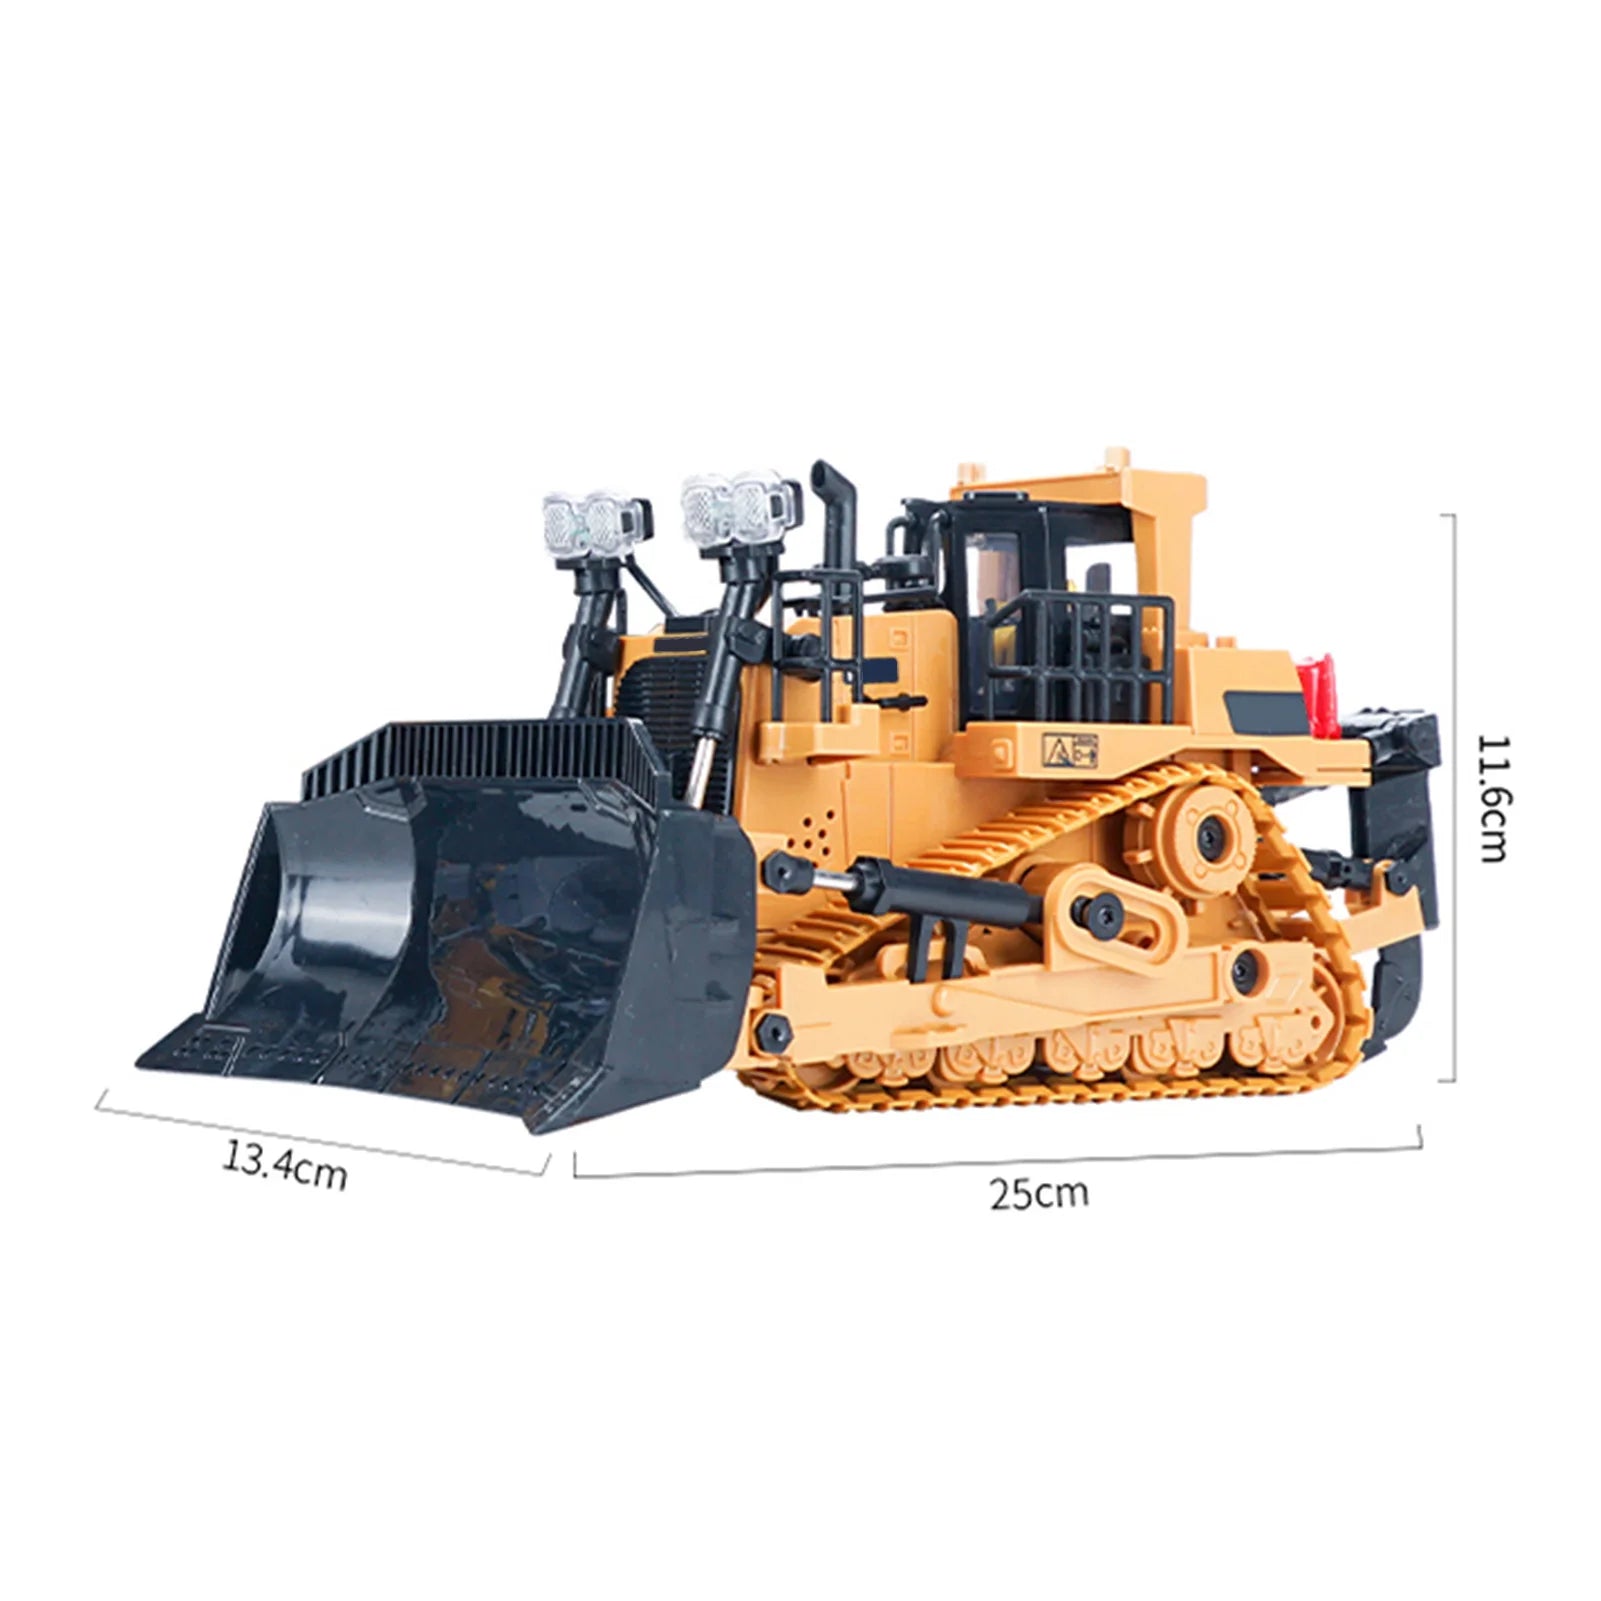 RC Excavator: 1/20 Main Color: Yellow, Black Frequency: